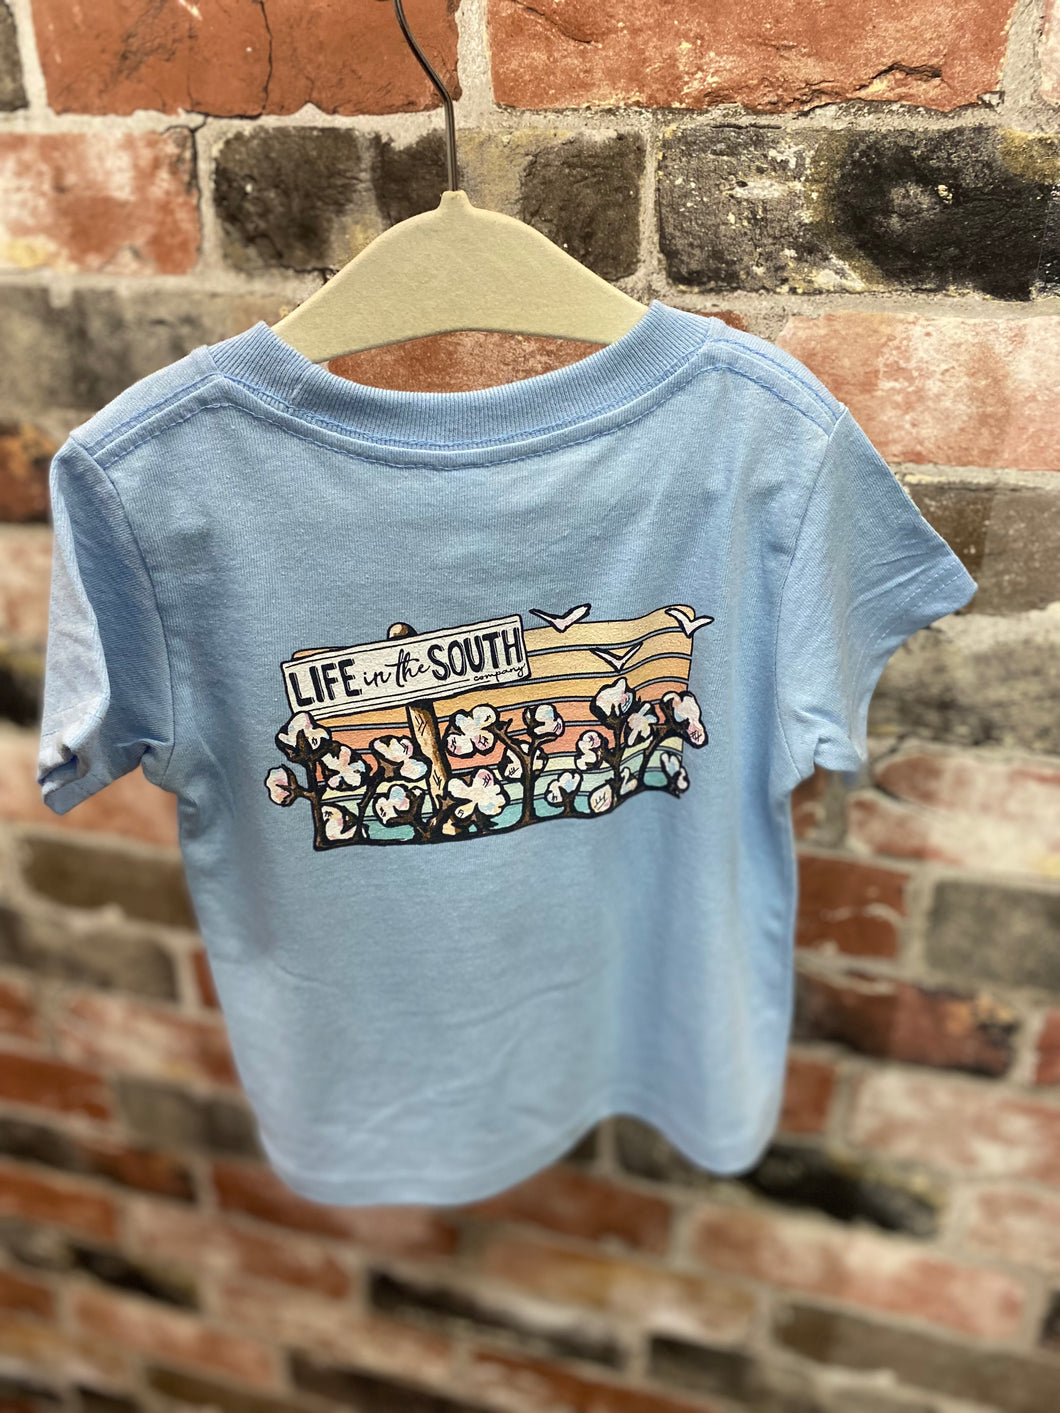 Life in the South Cotton Toddler Tee